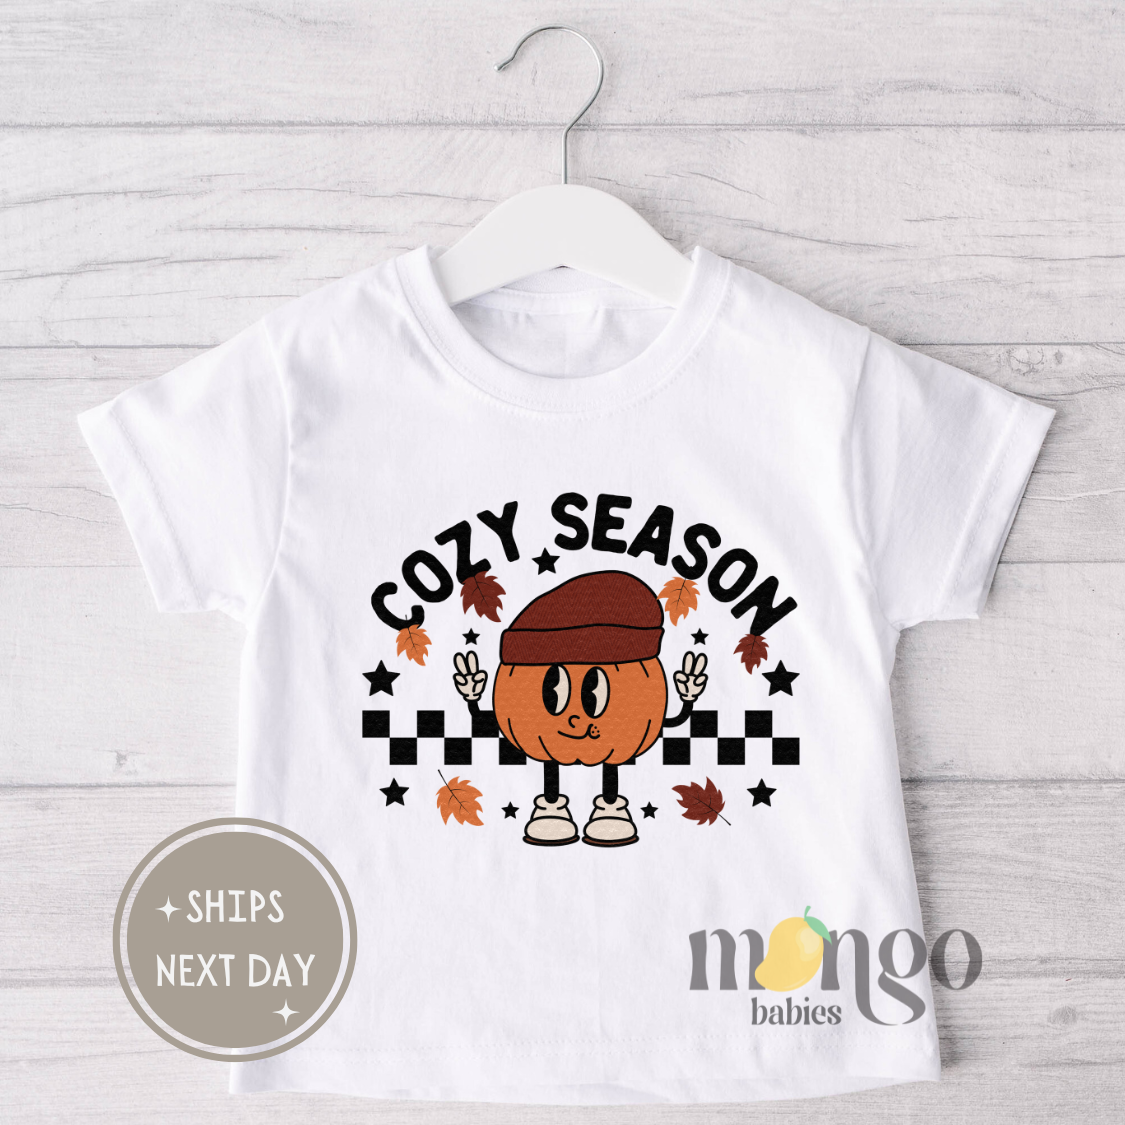 baby bodysuit gender neutral baby clothes baby boy outfits baby onesies newborn onesies baby girl onesies funny baby onesies baby announcement onesie personalized baby girl gifts custom baby onesie infant clothes